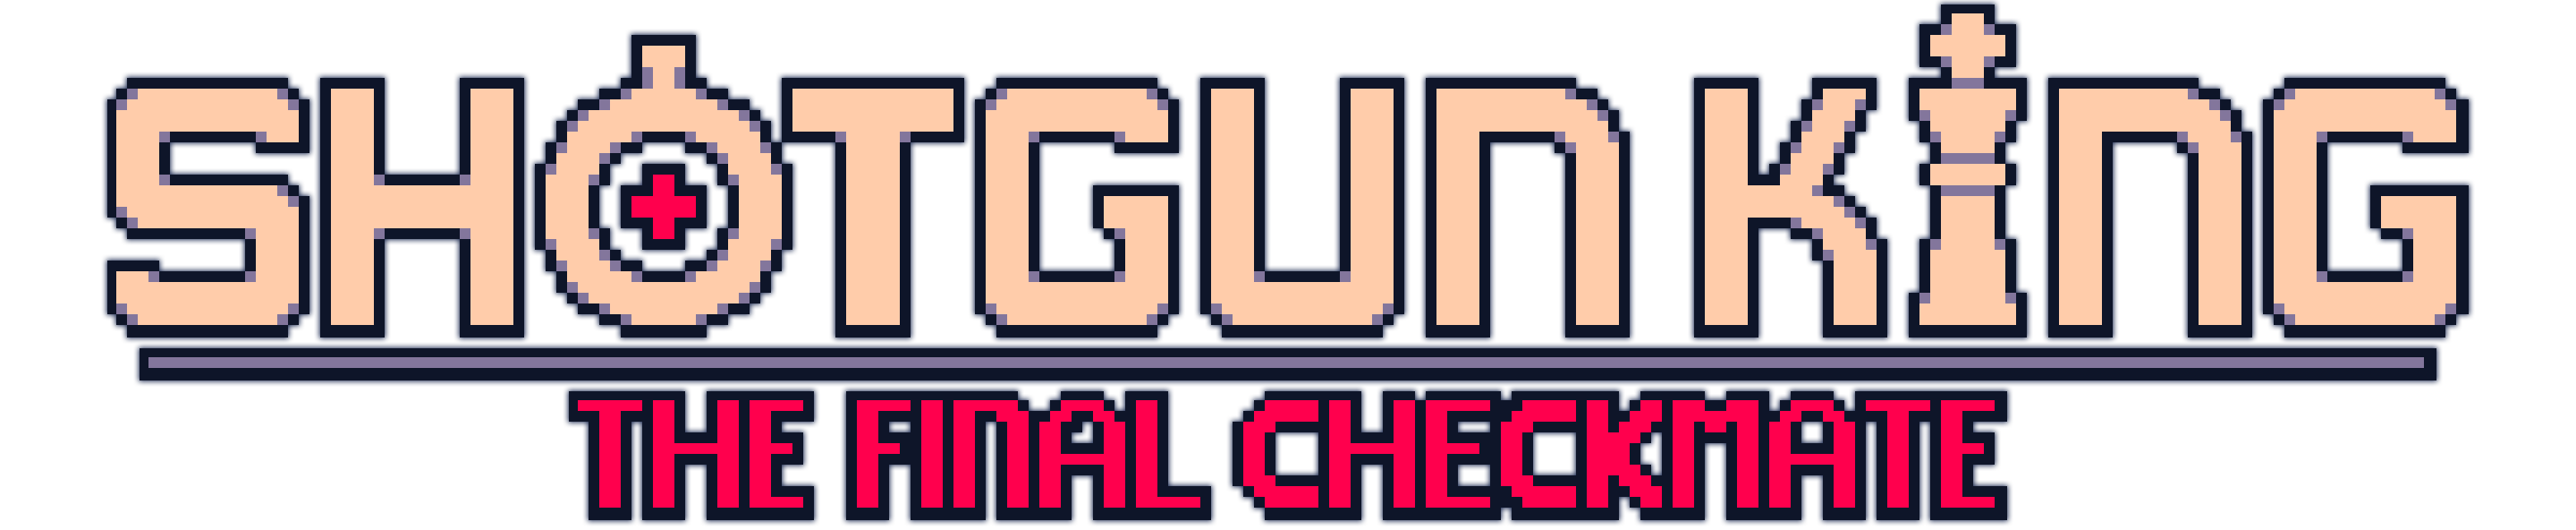 Shotgun King: The Final Checkmate PS4 & PS5 android iOS-TapTap